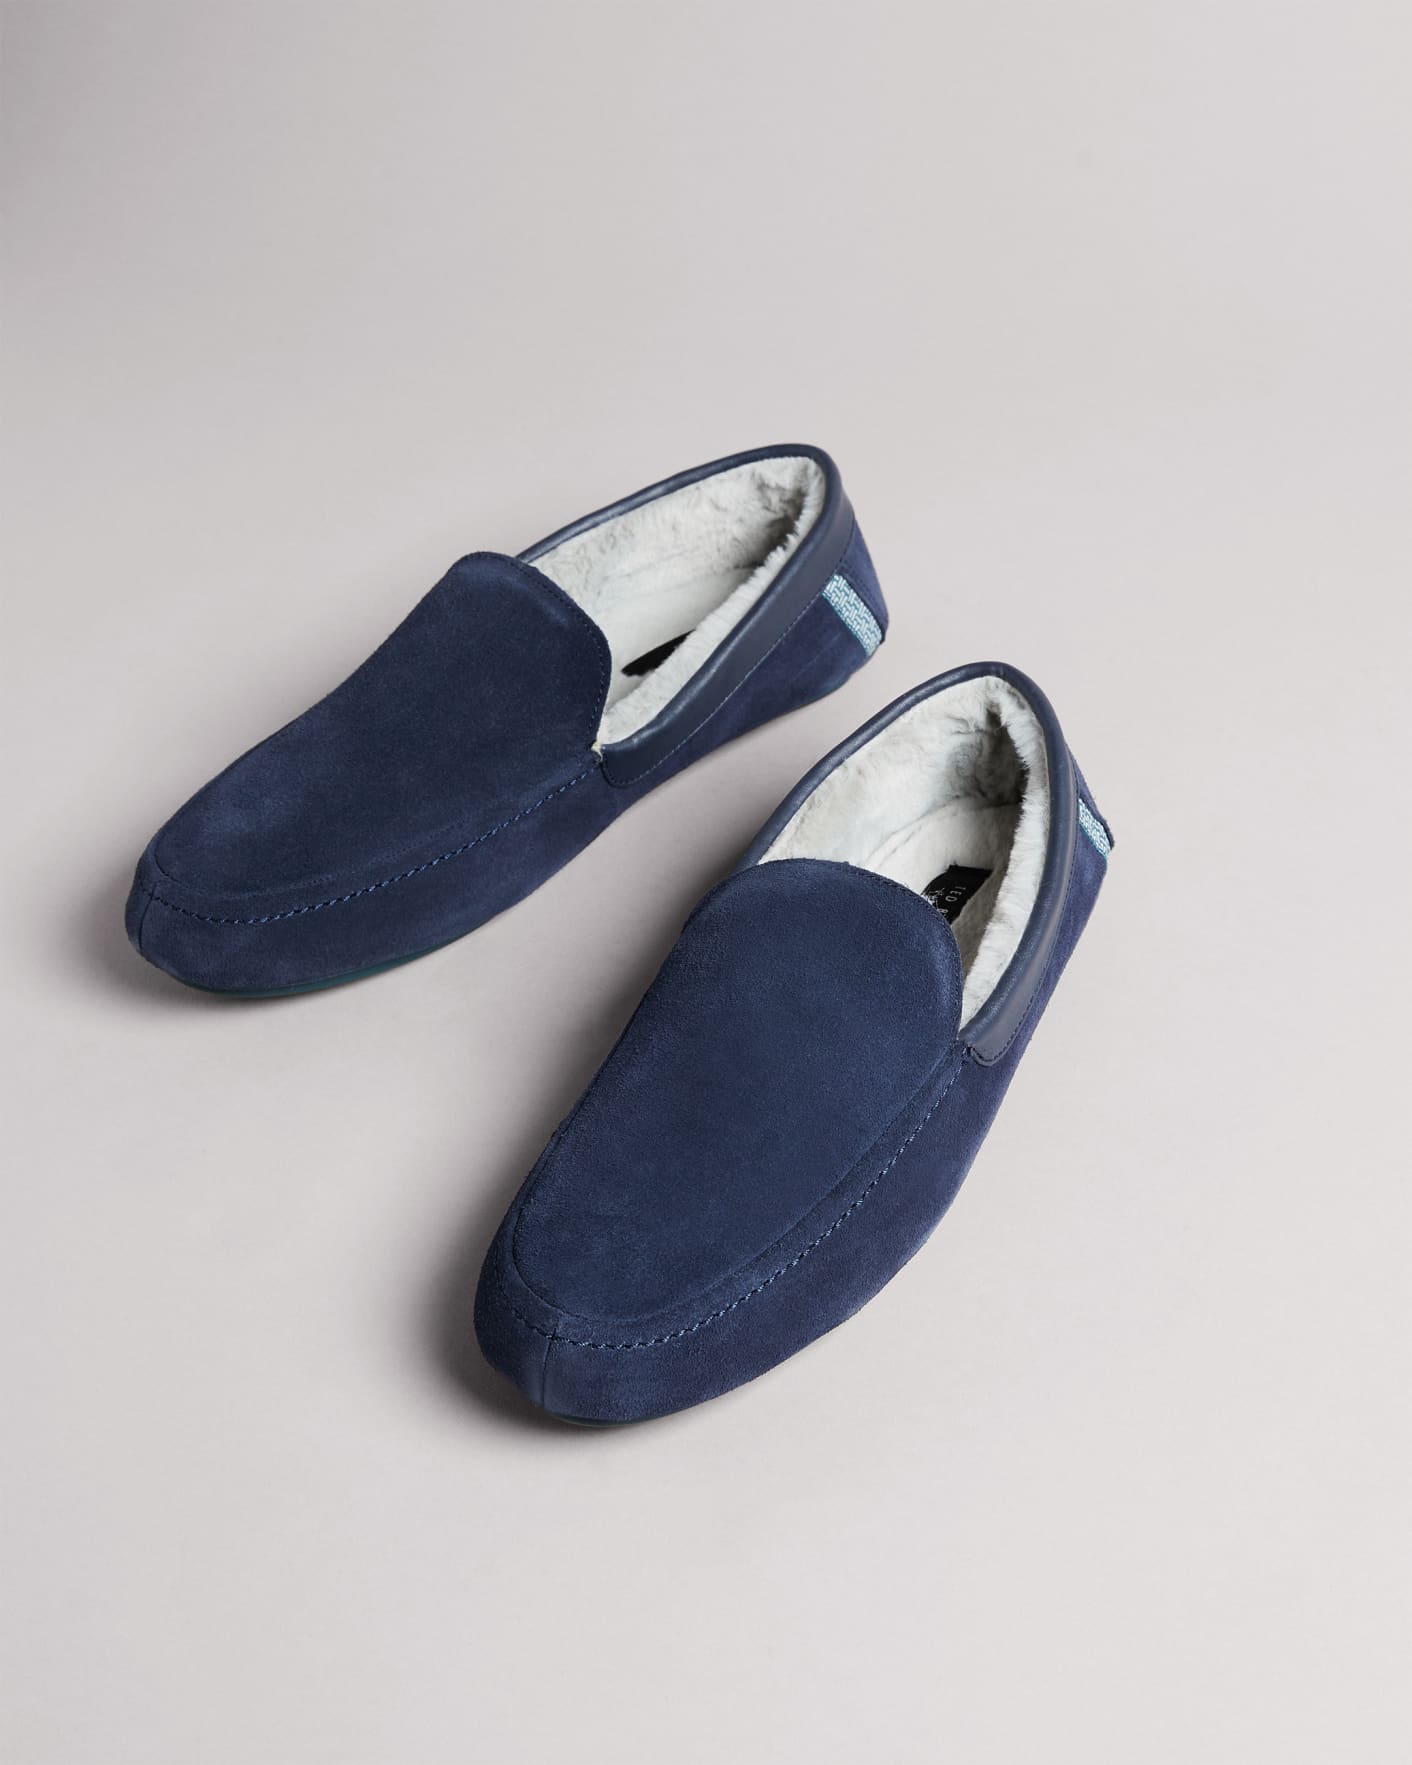 Save 45% Mens Shoes Slip-on shoes Slippers Blue Ted Baker Valant in Navy for Men 